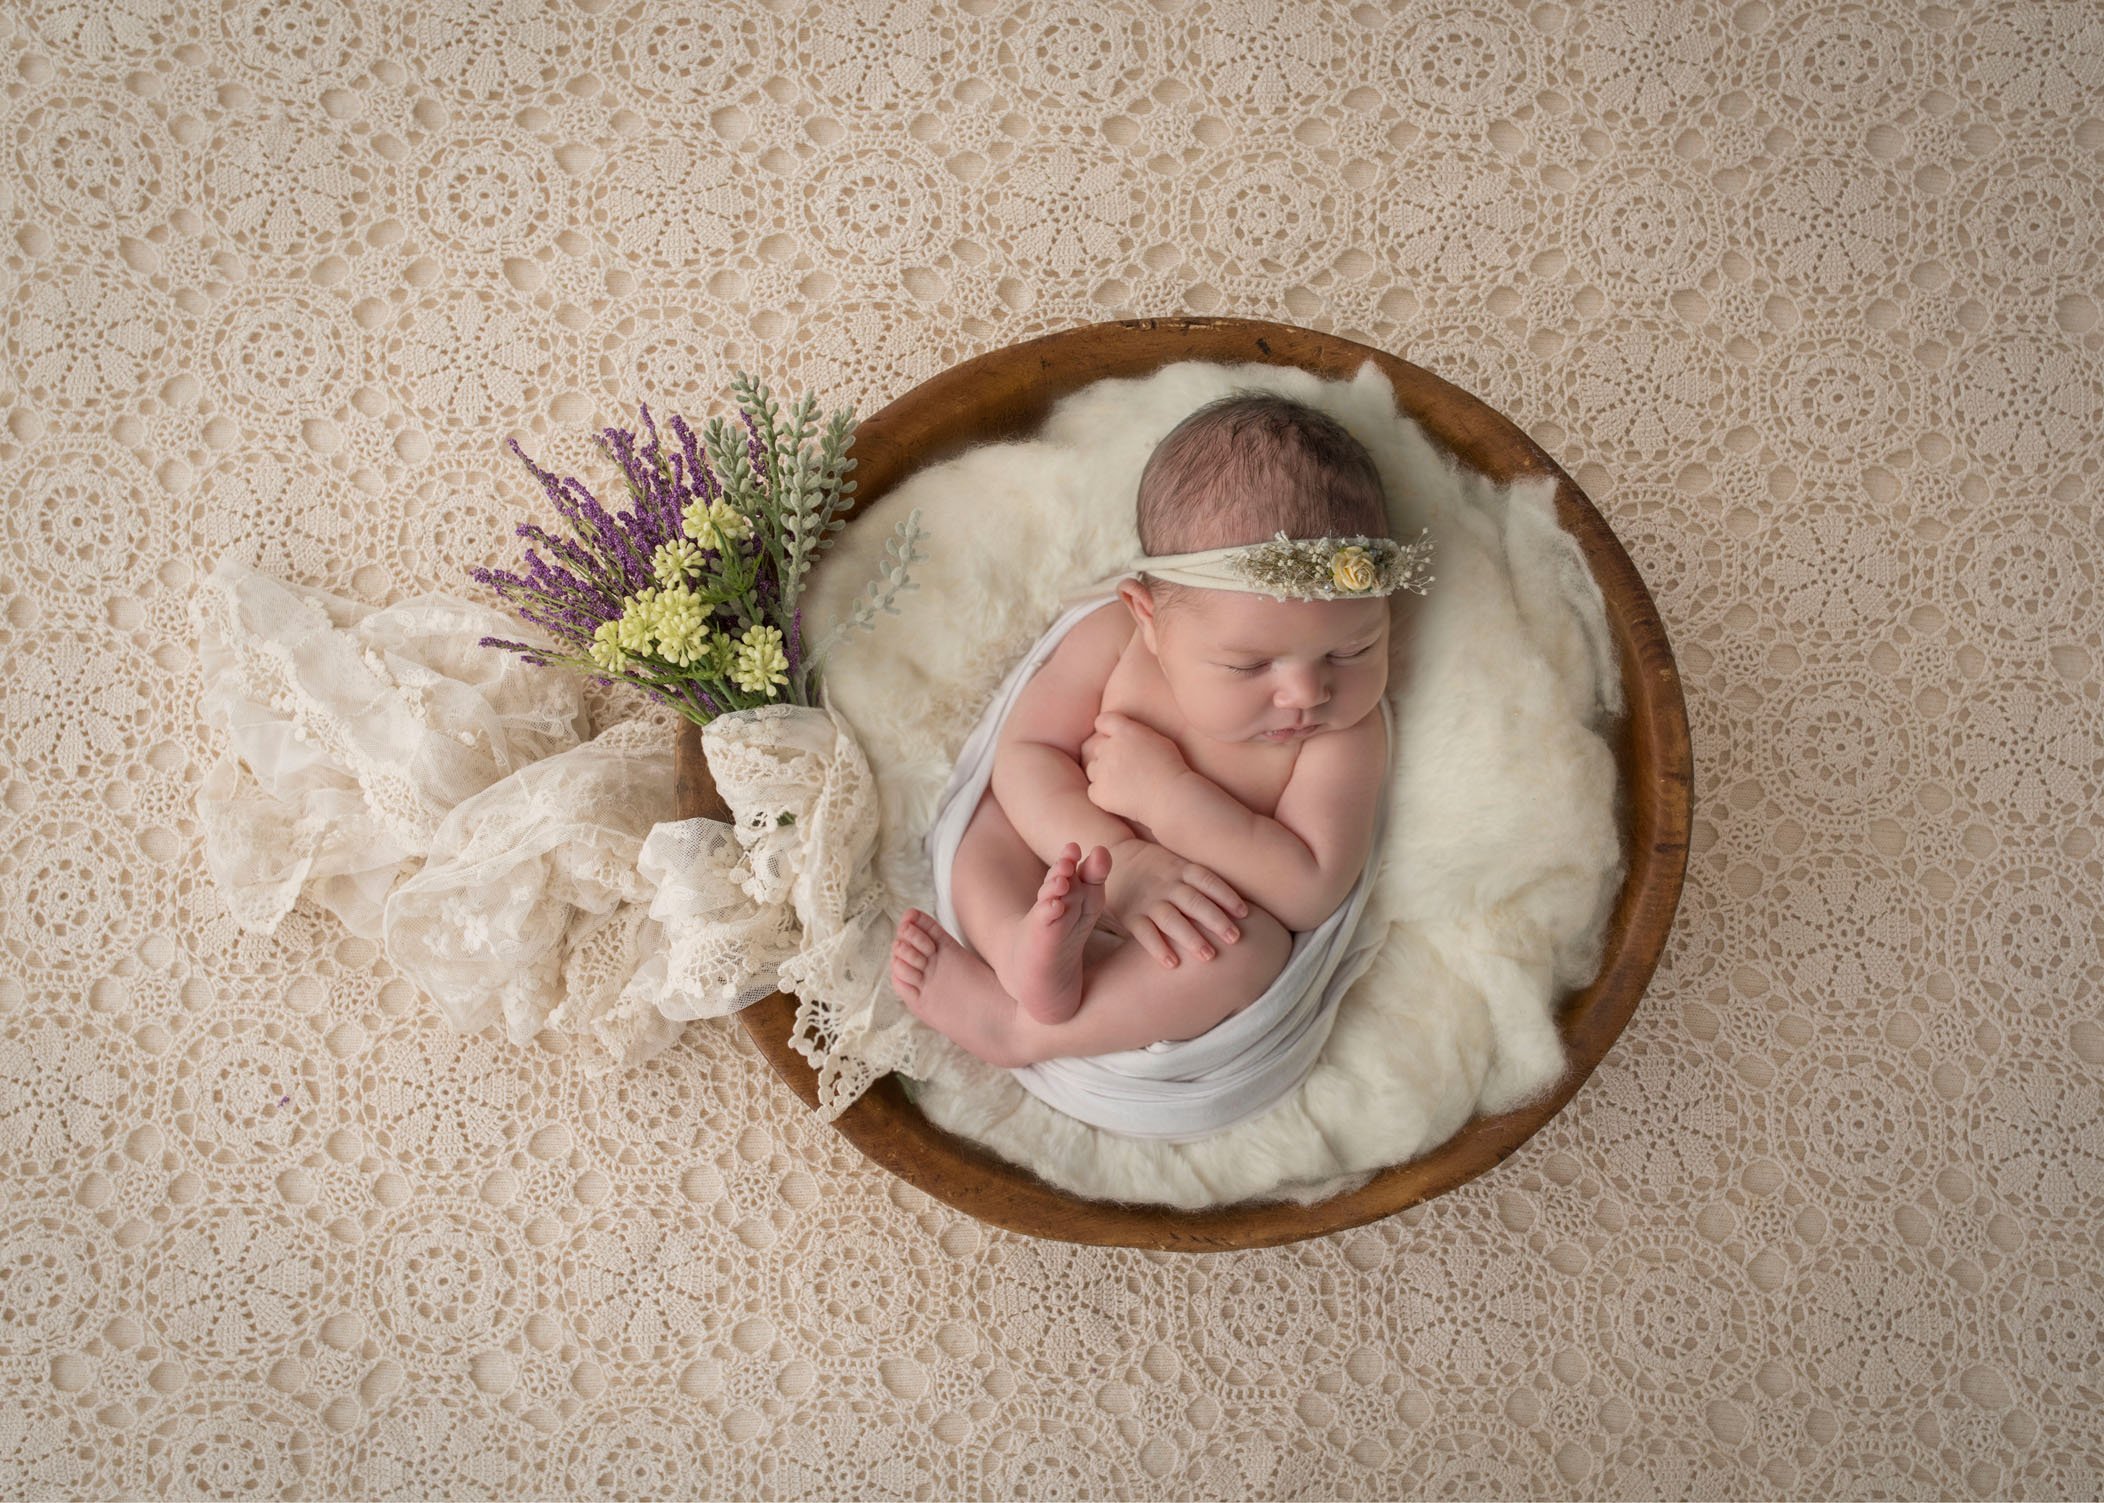 newborn baby girl asleep in wooden bowl with flowers nearby